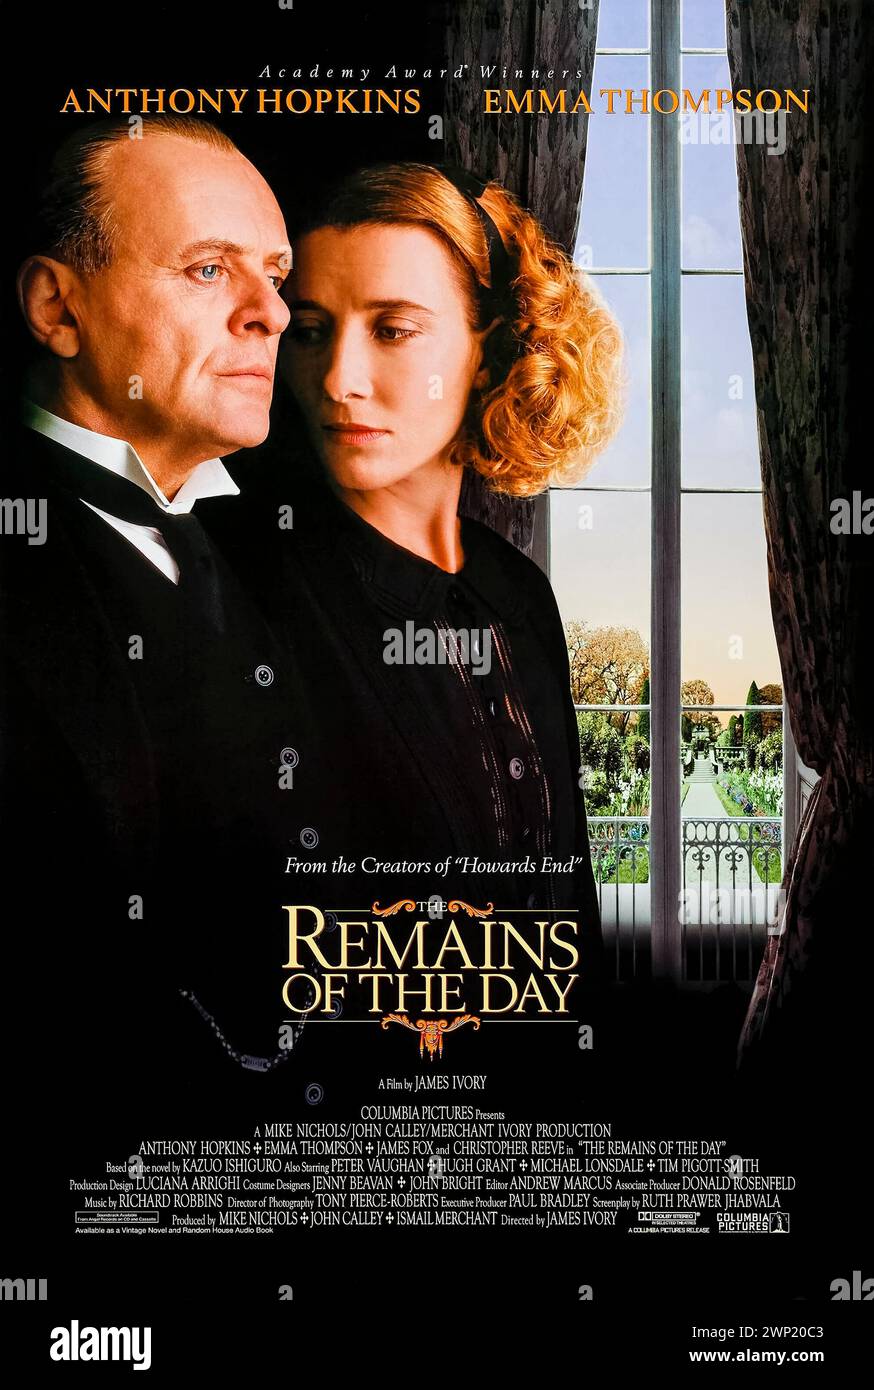 The Remains of the Day (1993) directed by James Ivory and starring Anthony Hopkins, Emma Thompson and John Haycraft. Adaptation of Kazuo Ishiguro's novel about a butler who sacrificed body and soul to service in the years leading up to World War II only to discover how misguided his loyalty was to Lord Darlington. Photograph of an original 1993 US one sheet poster. ***EDITORIAL USE ONLY*** Credit: BFA / Columbia Pictures Stock Photo